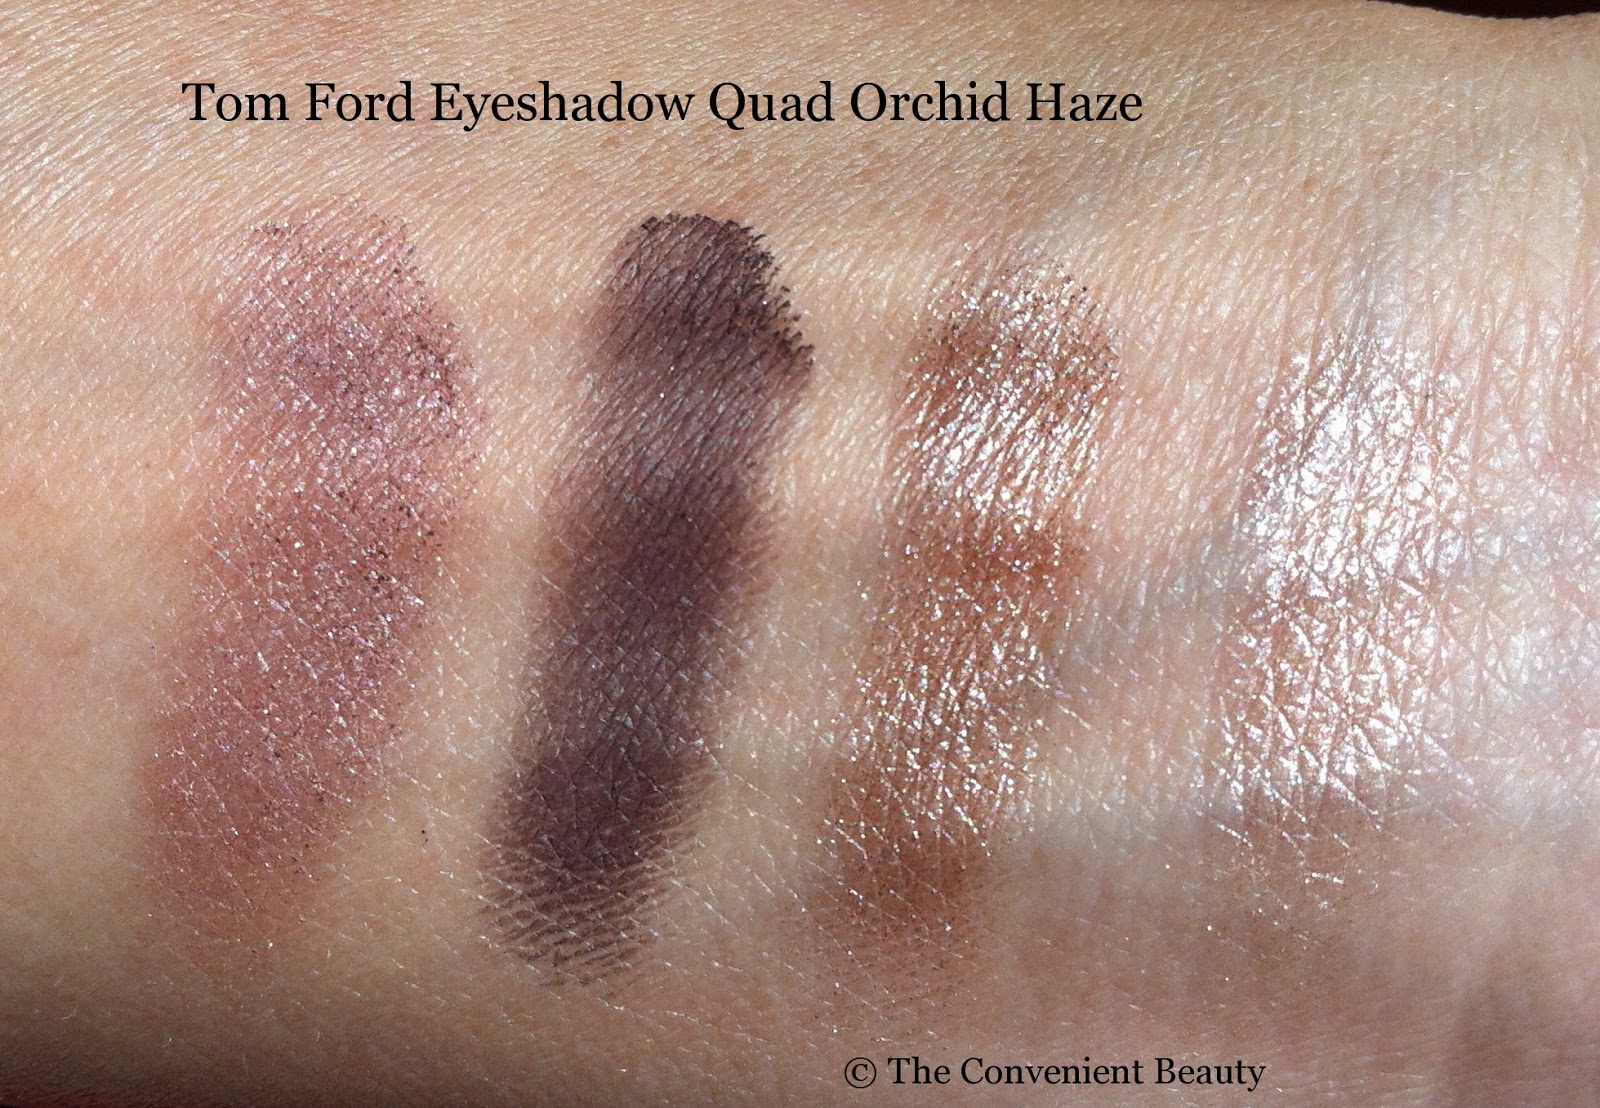 I detaljer international absorption The Convenient Beauty: Review: Tom Ford Eye Color Quad Orchid Haze